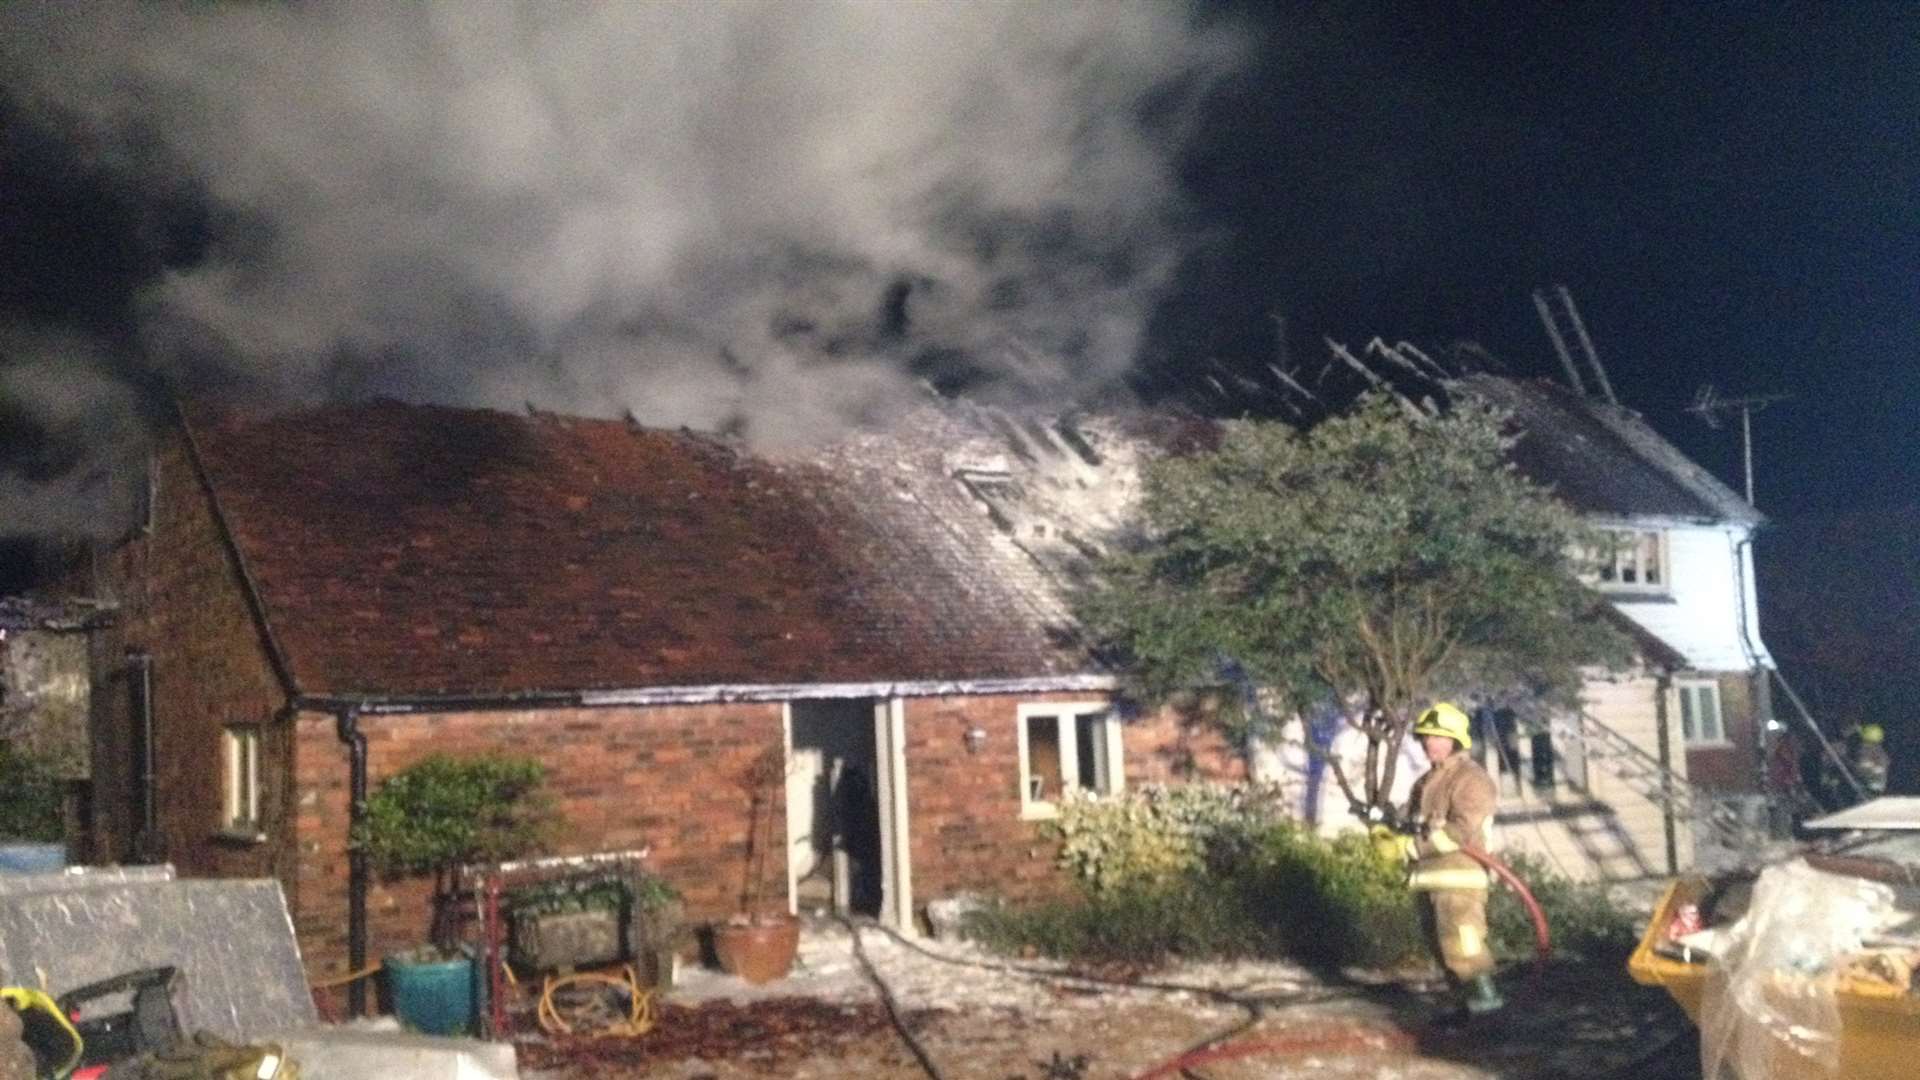 The oast house badly damaged in a fire